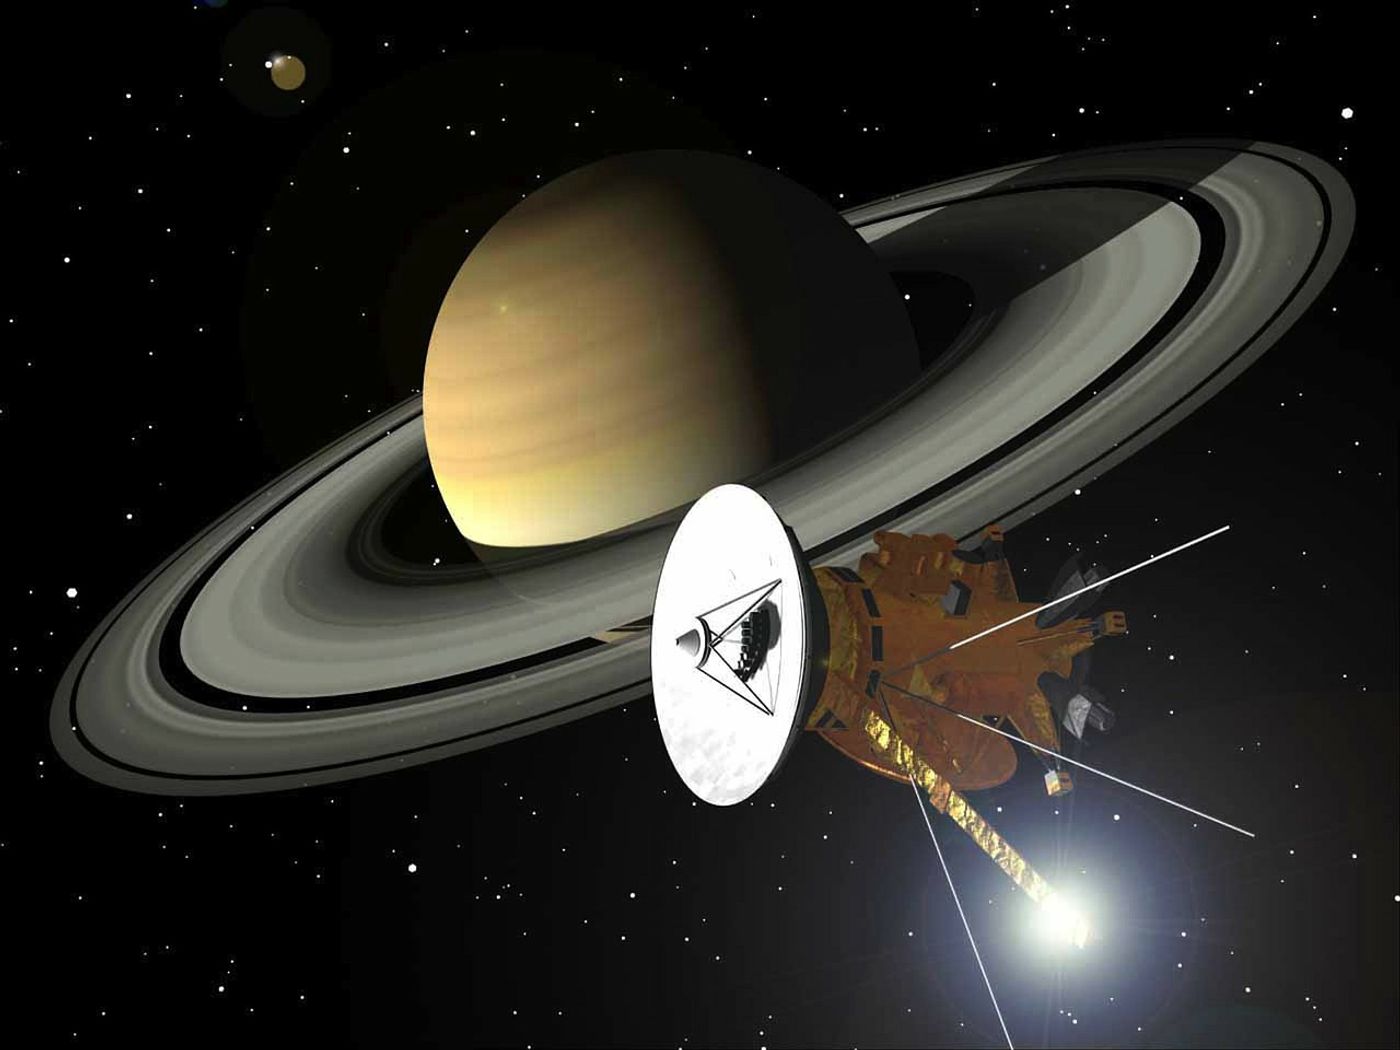 An artist's impression of the Cassini probe at Saturn.